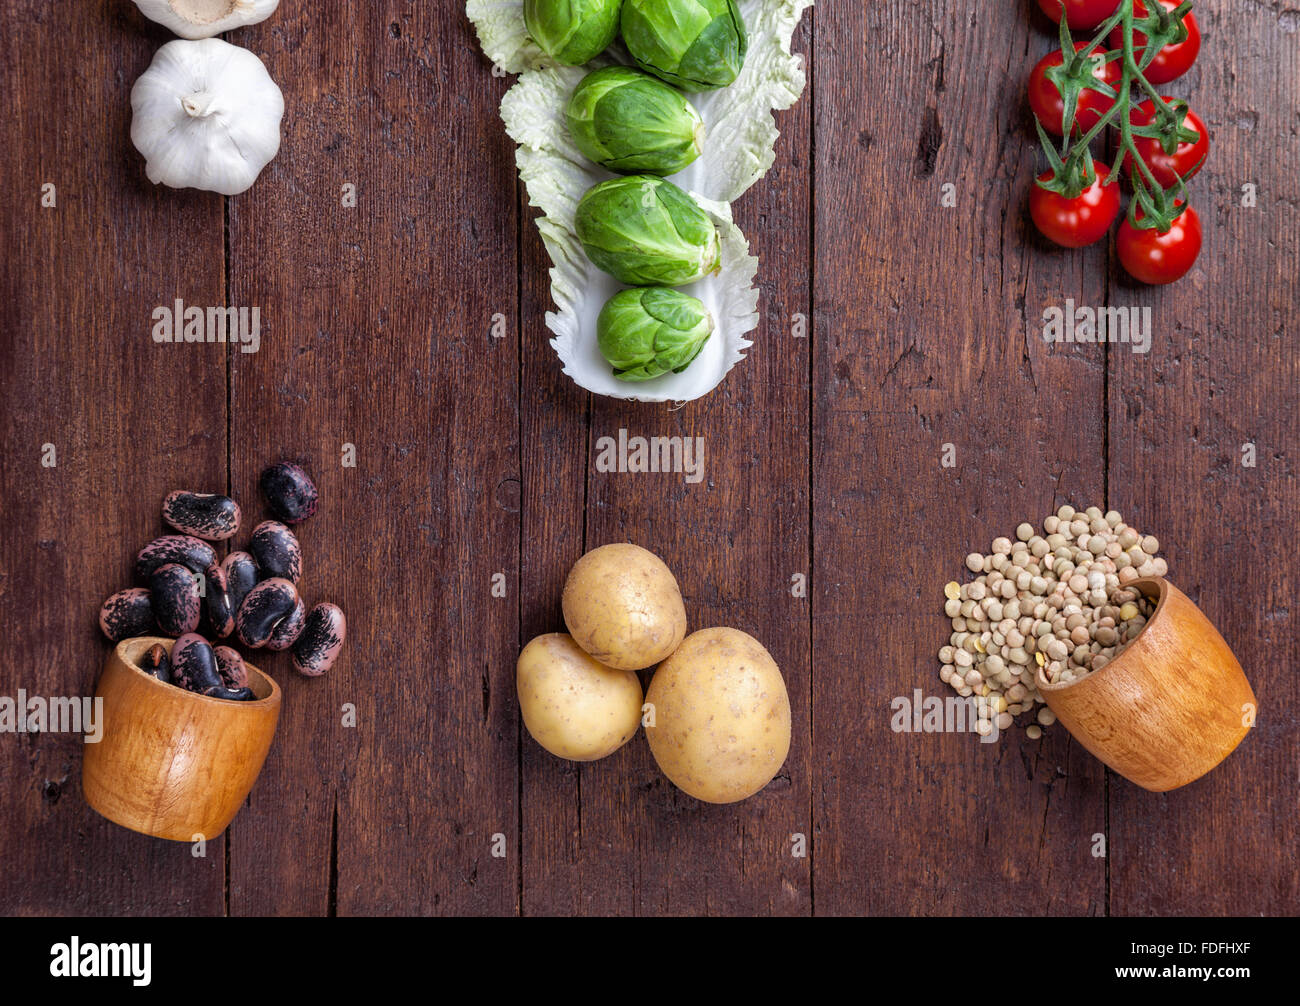 Fresh and healthy organic vegetables and food ingredients on wooden background Stock Photo